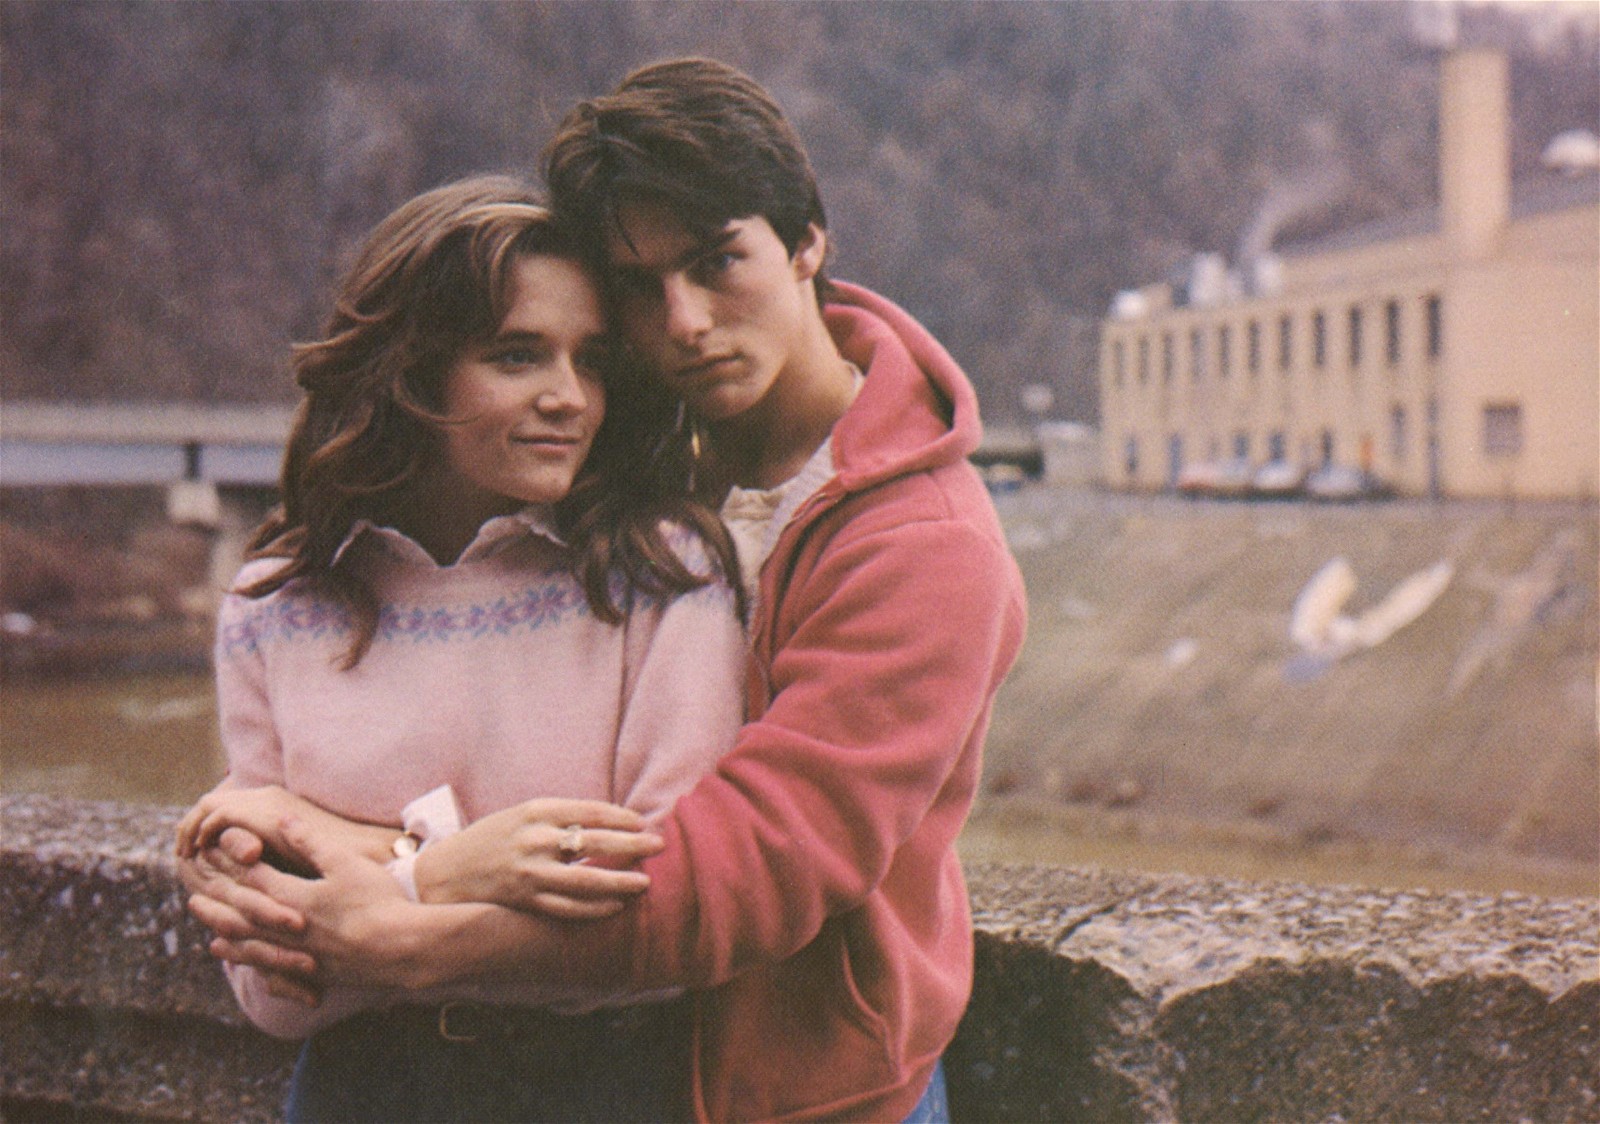 Tom Cruise with Lea Thompson in a still from “All the Right Moves” (1983) | Lucille Ball Productions